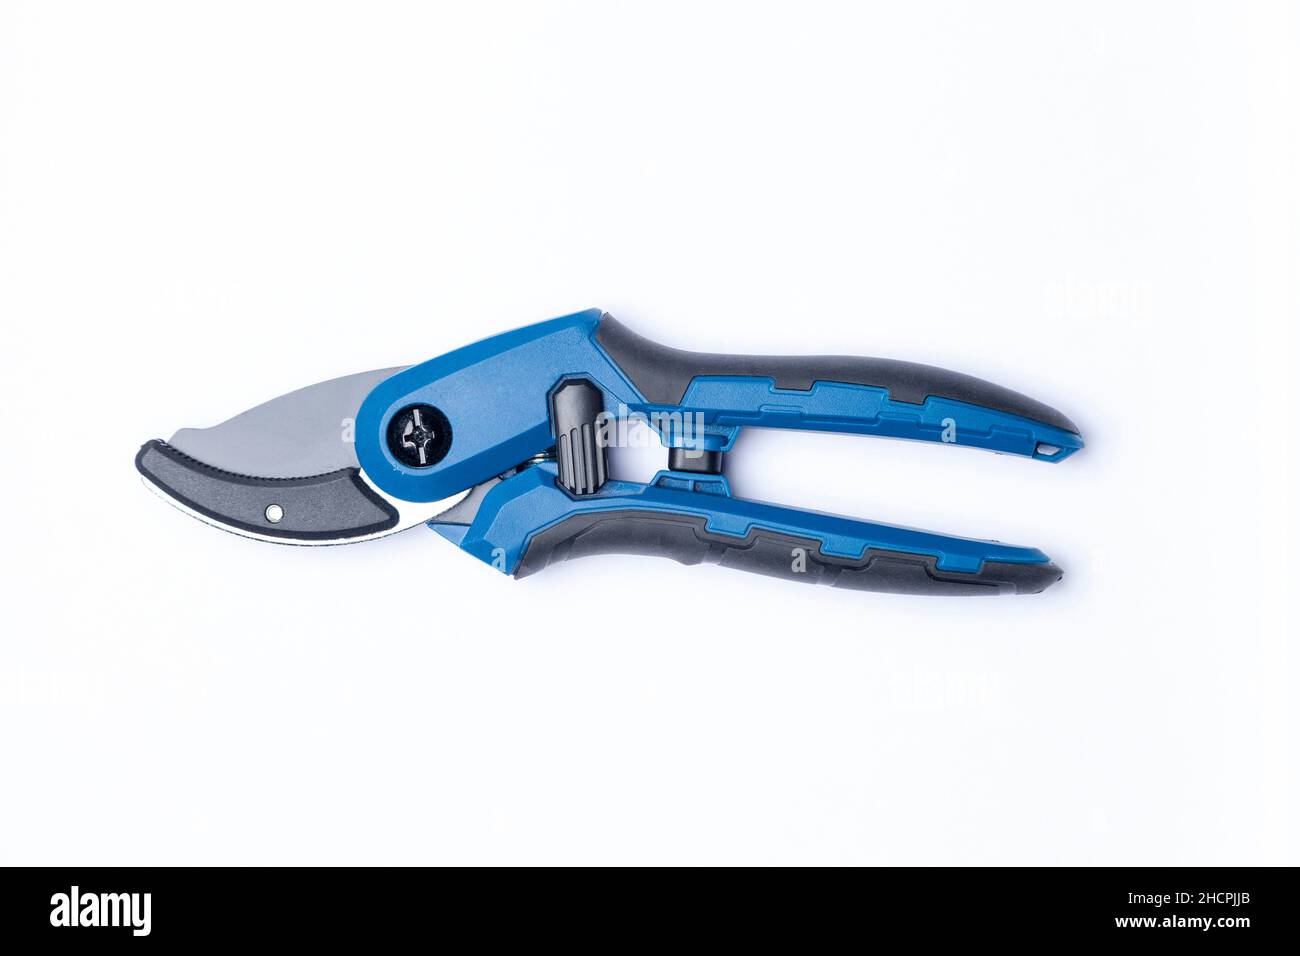 A pair of secateurs on a white background Stock Photo